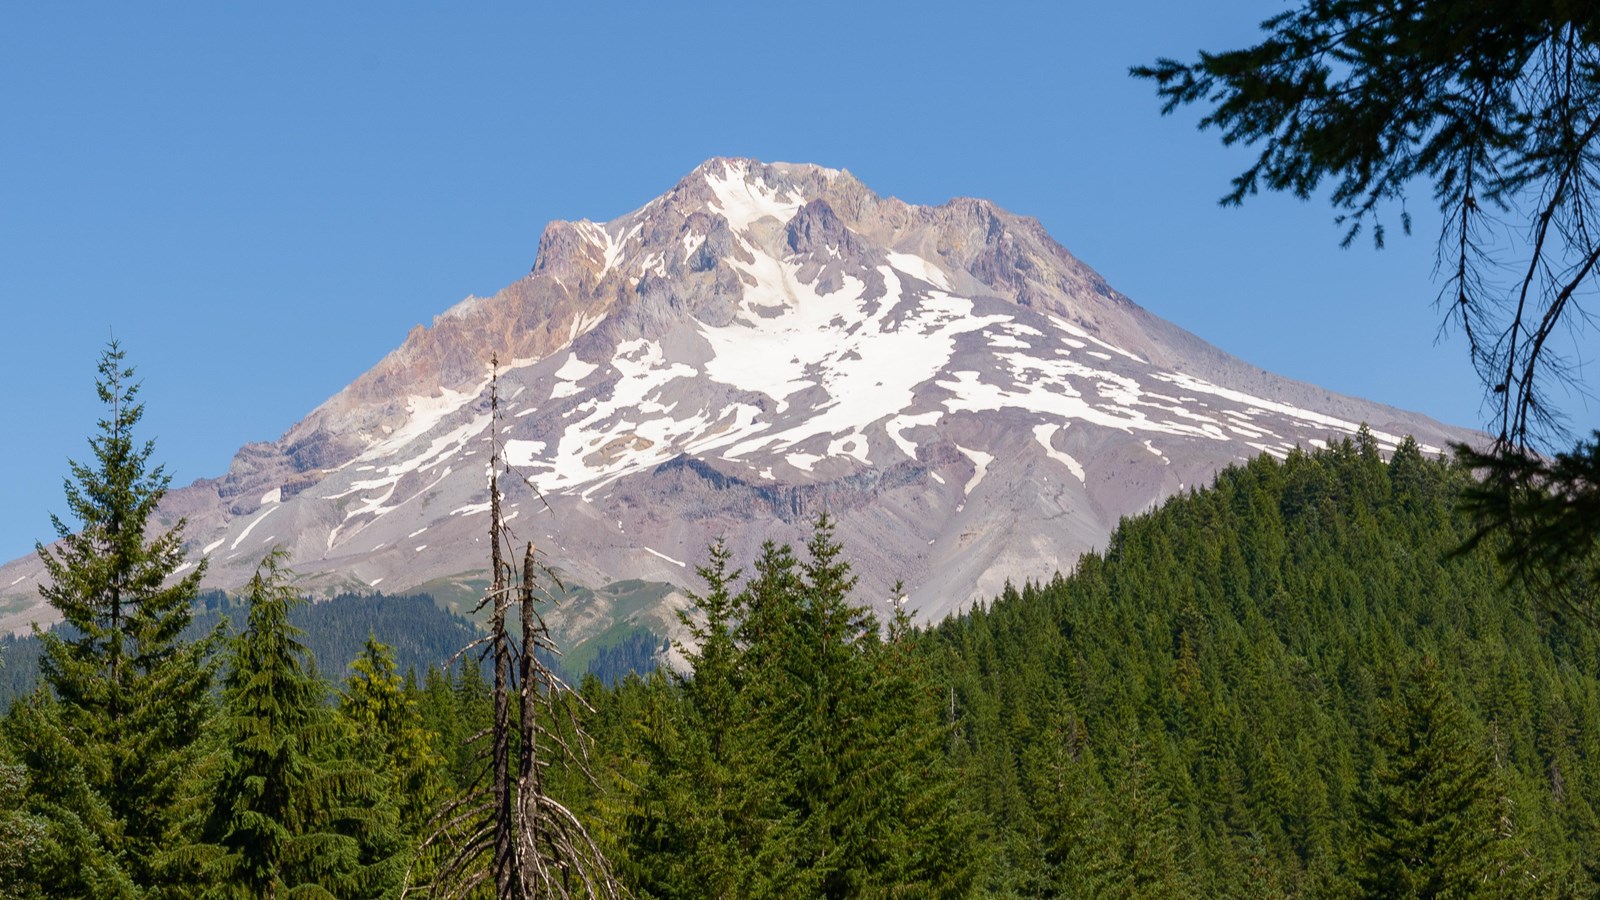 A prominent mountain peak rises above a dark, thick conifer forest.